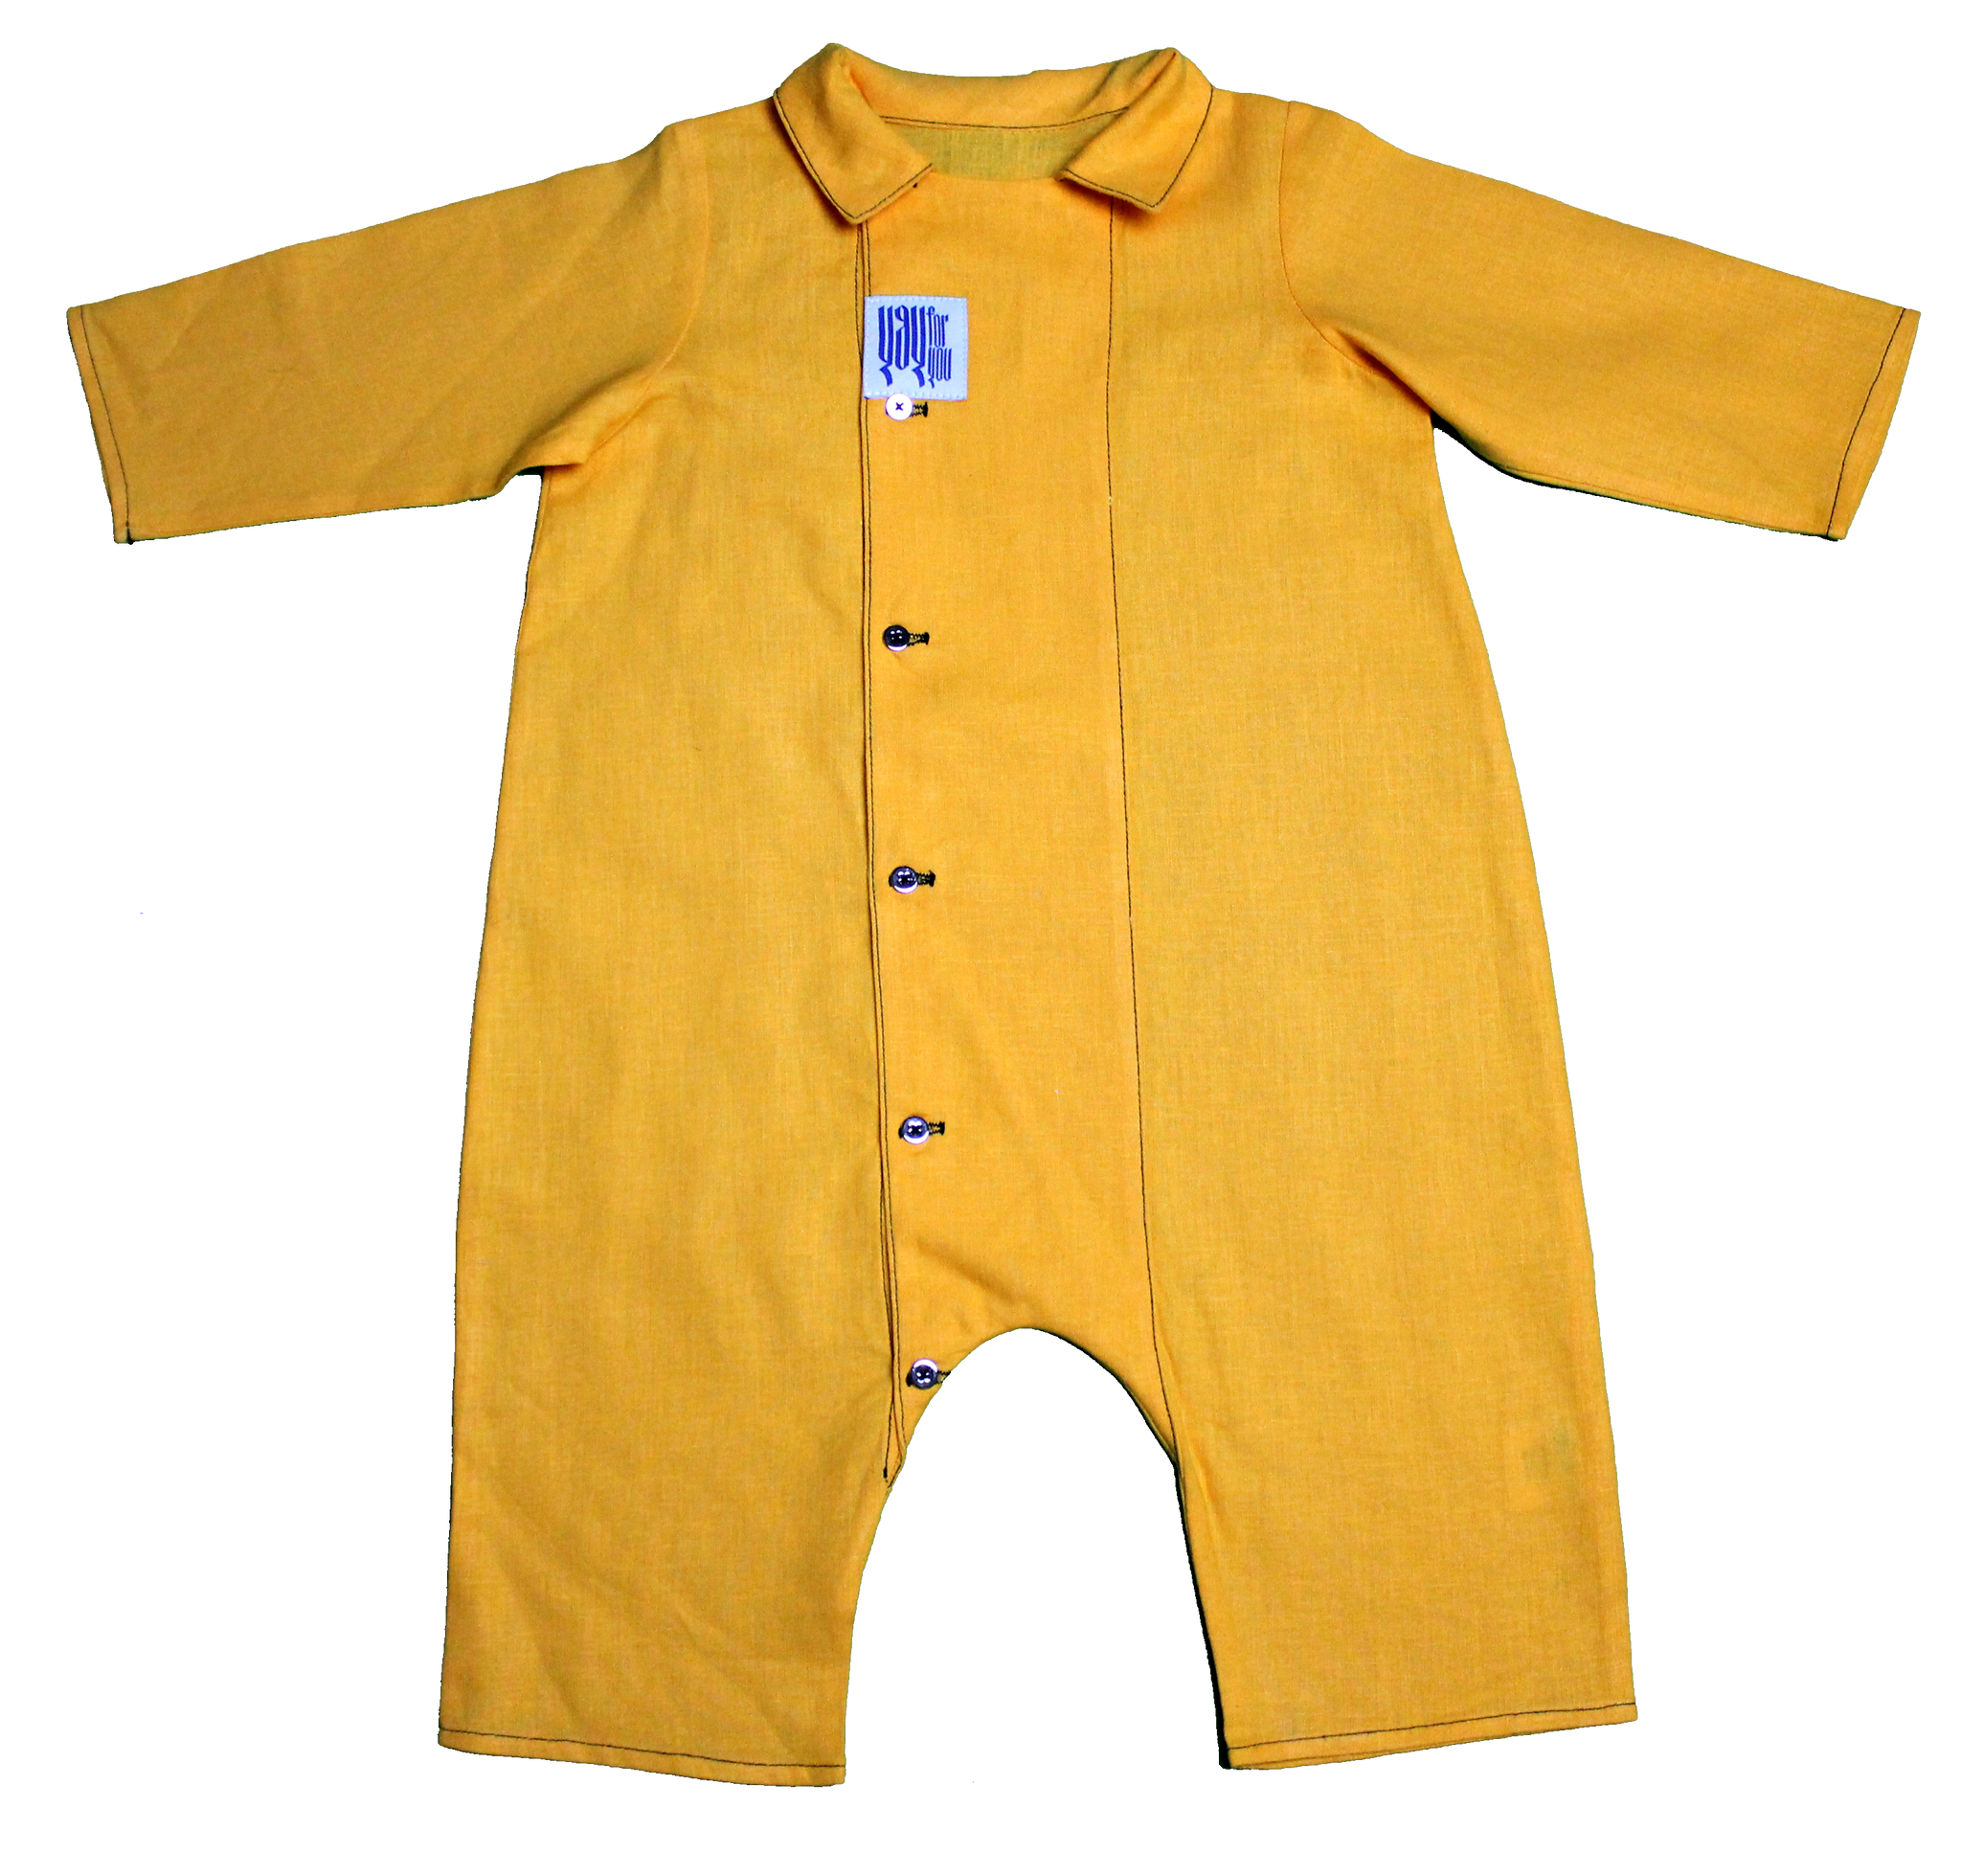 THE ERNIE SOLID YELLOW